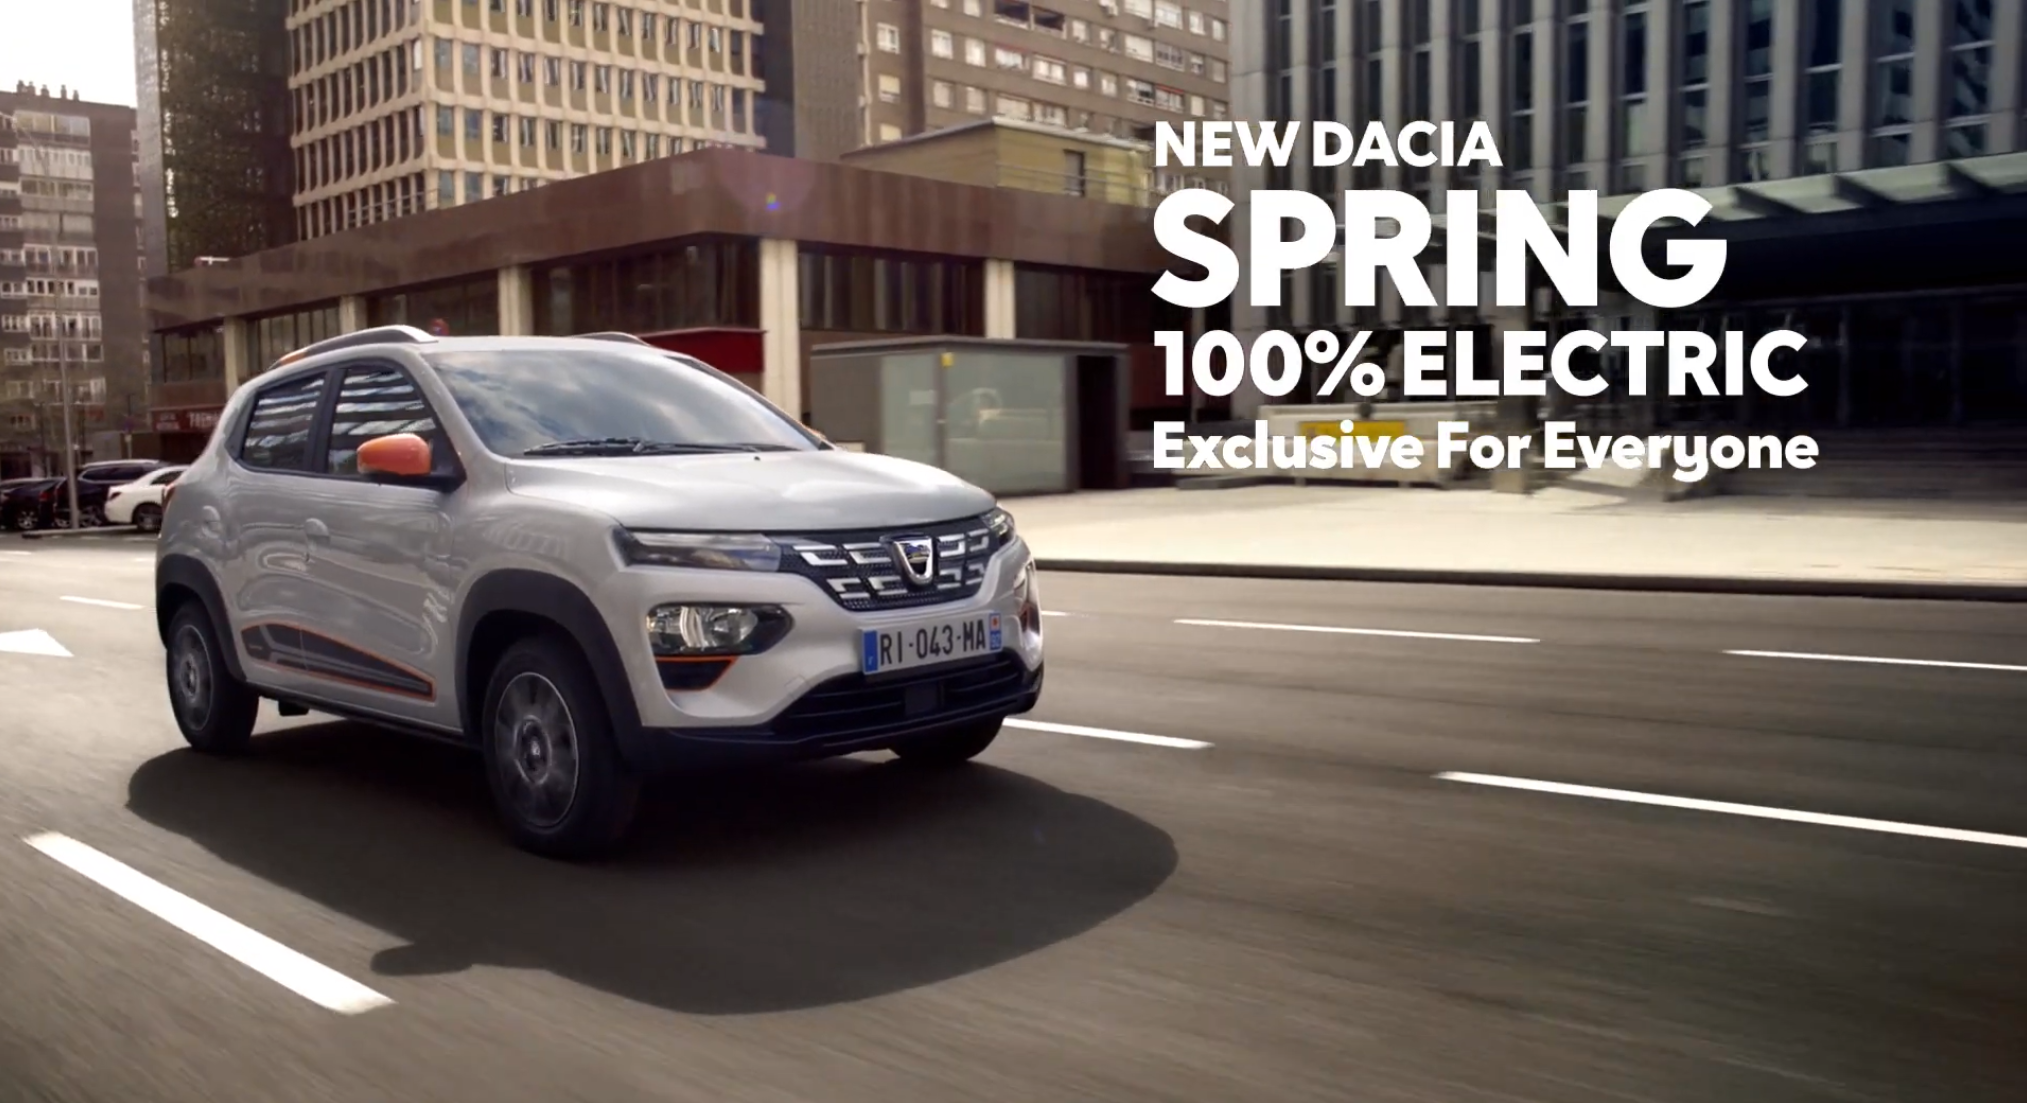 Publicis Conseil Launches New campaign to Celebrate the Arrival of Dacia's  Spring